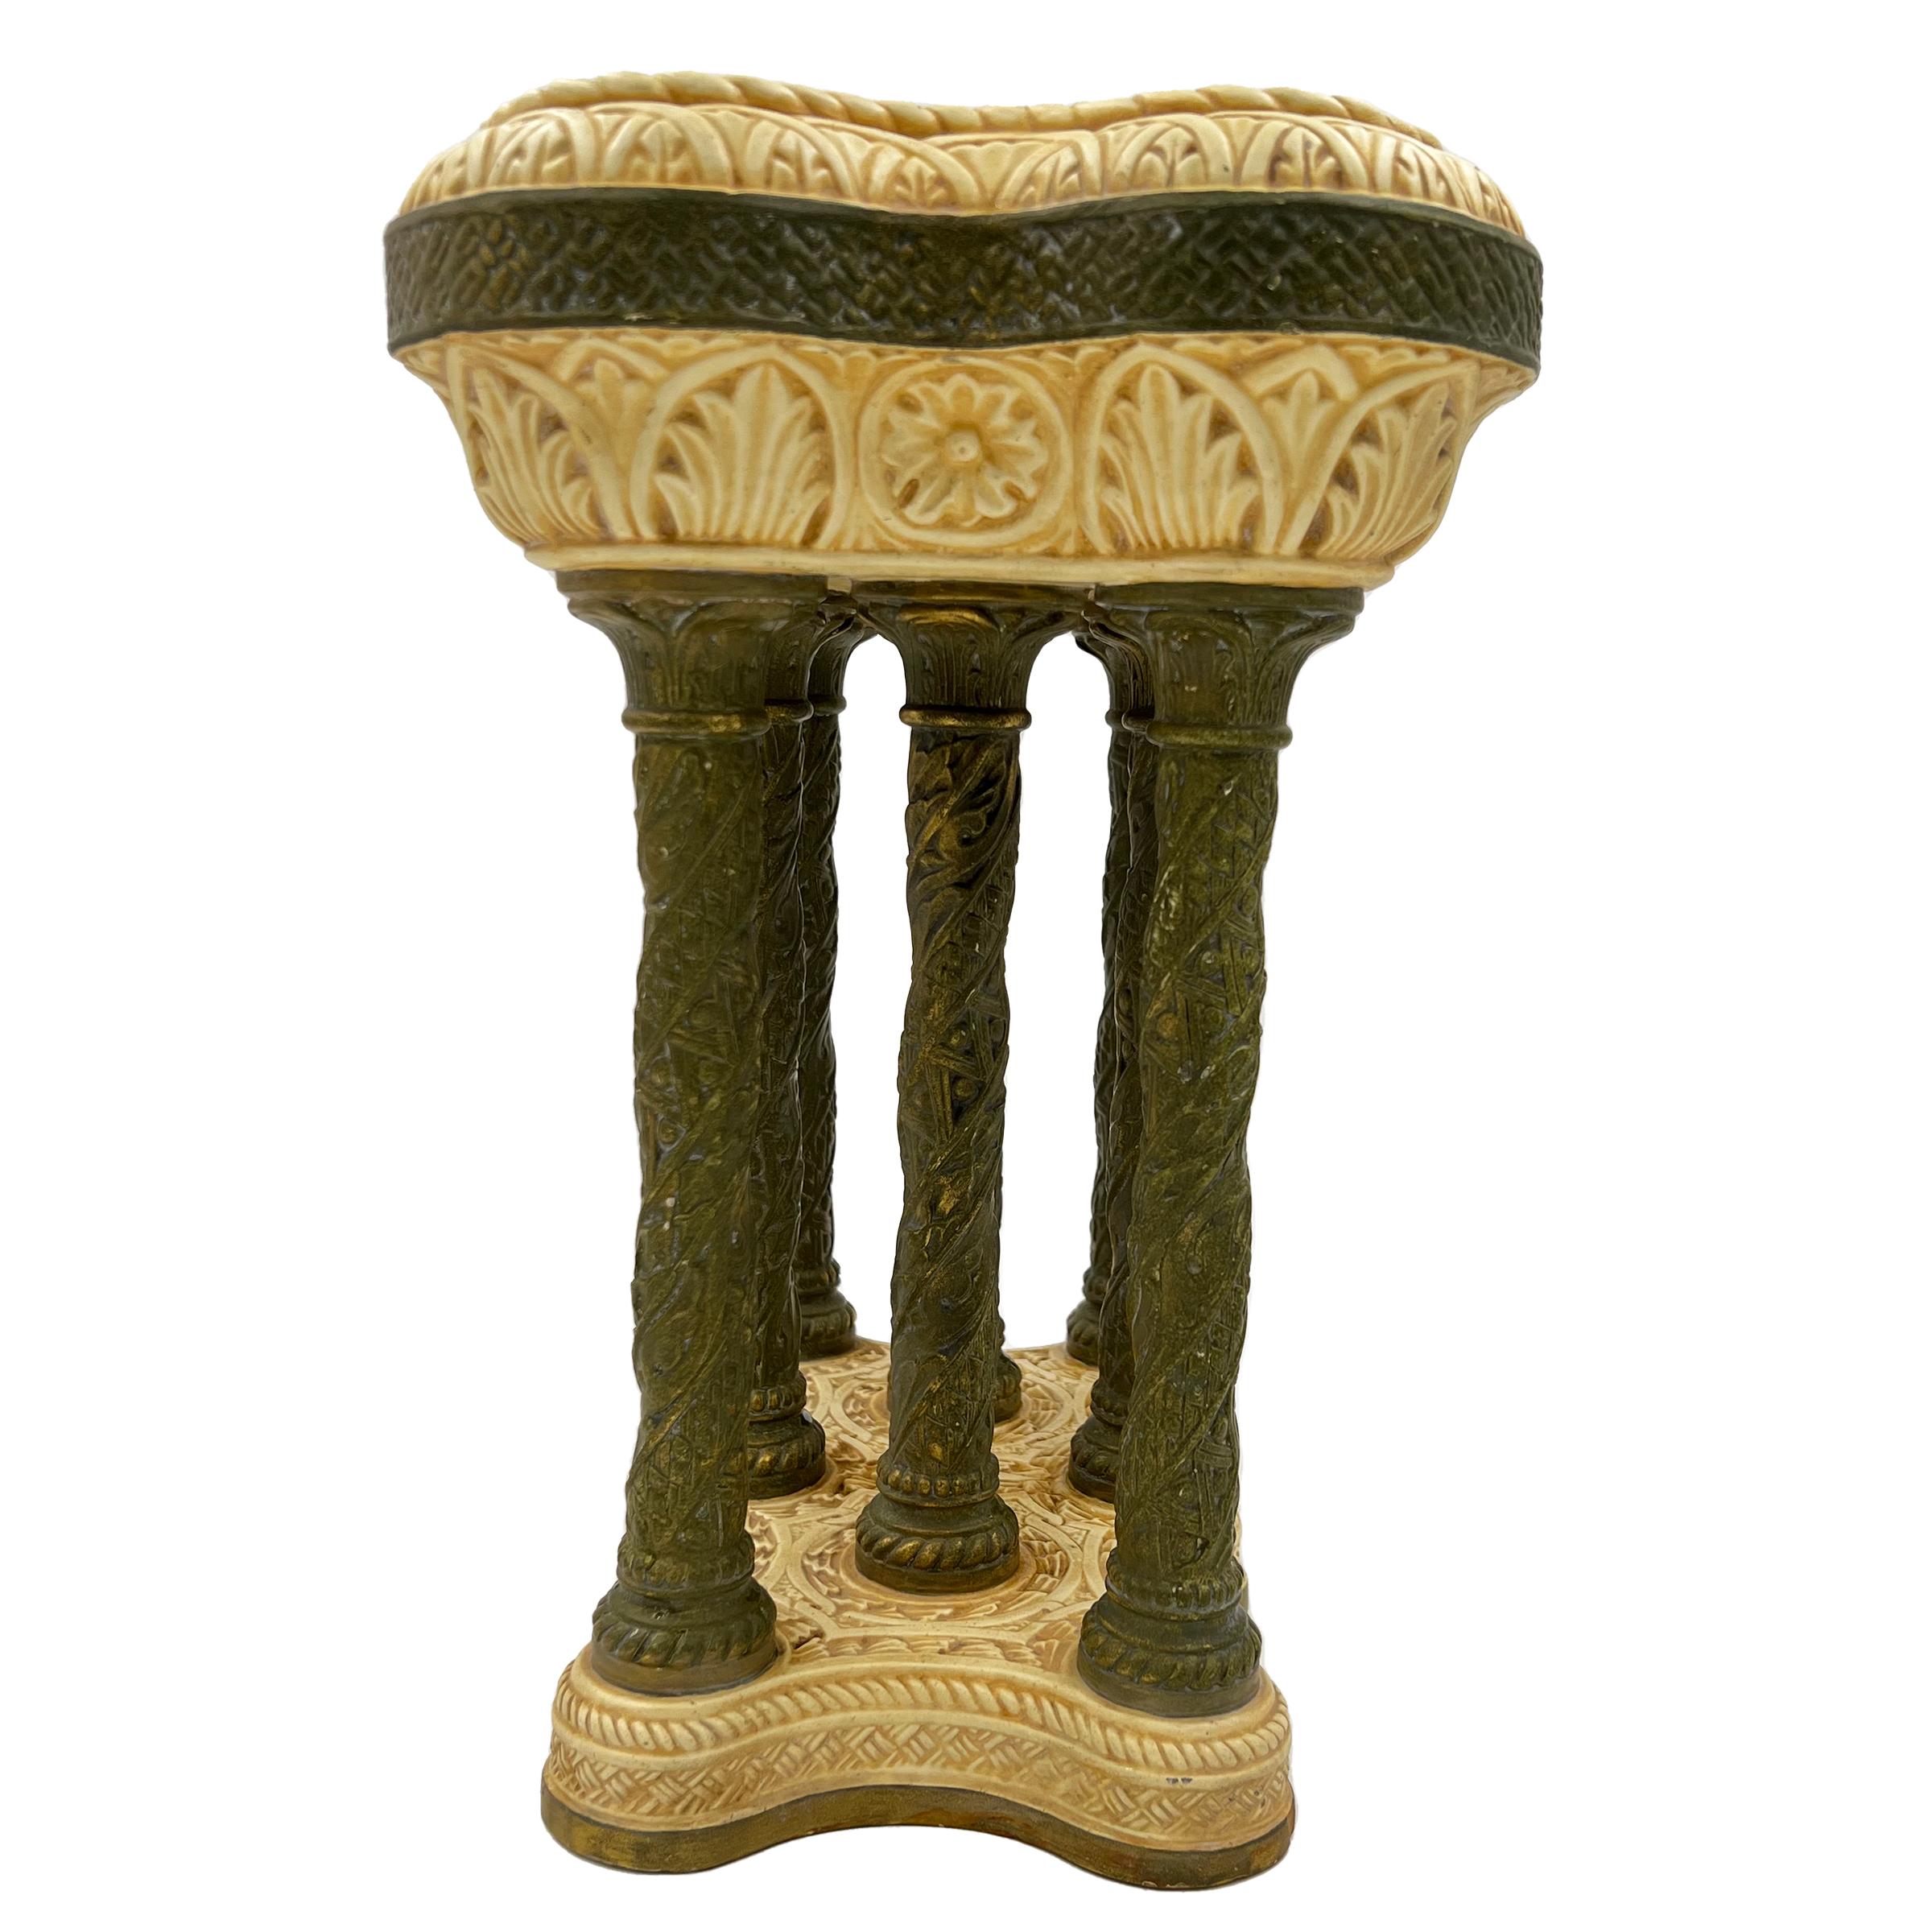 Fine and unique porcelain jardiniere raised on eight columns, Late 19th century - Early 20th century.